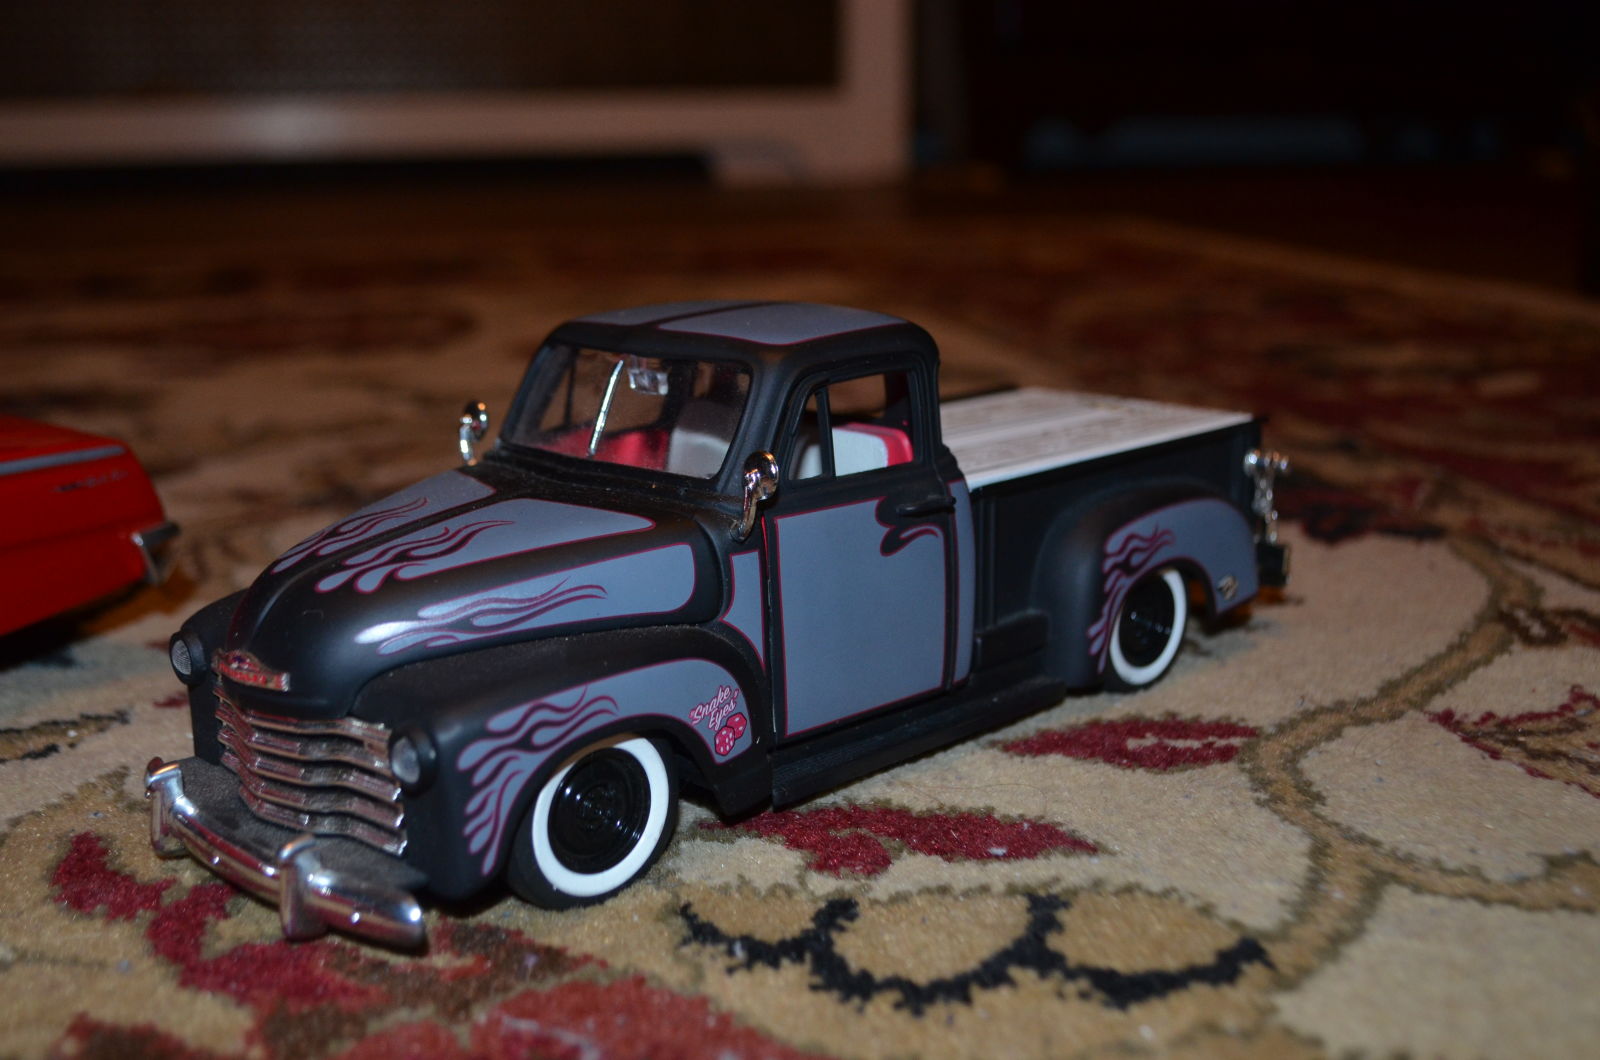  1/25 JADA Chevrolet pickup from the “Road Rats” line. No visible issues except dust  